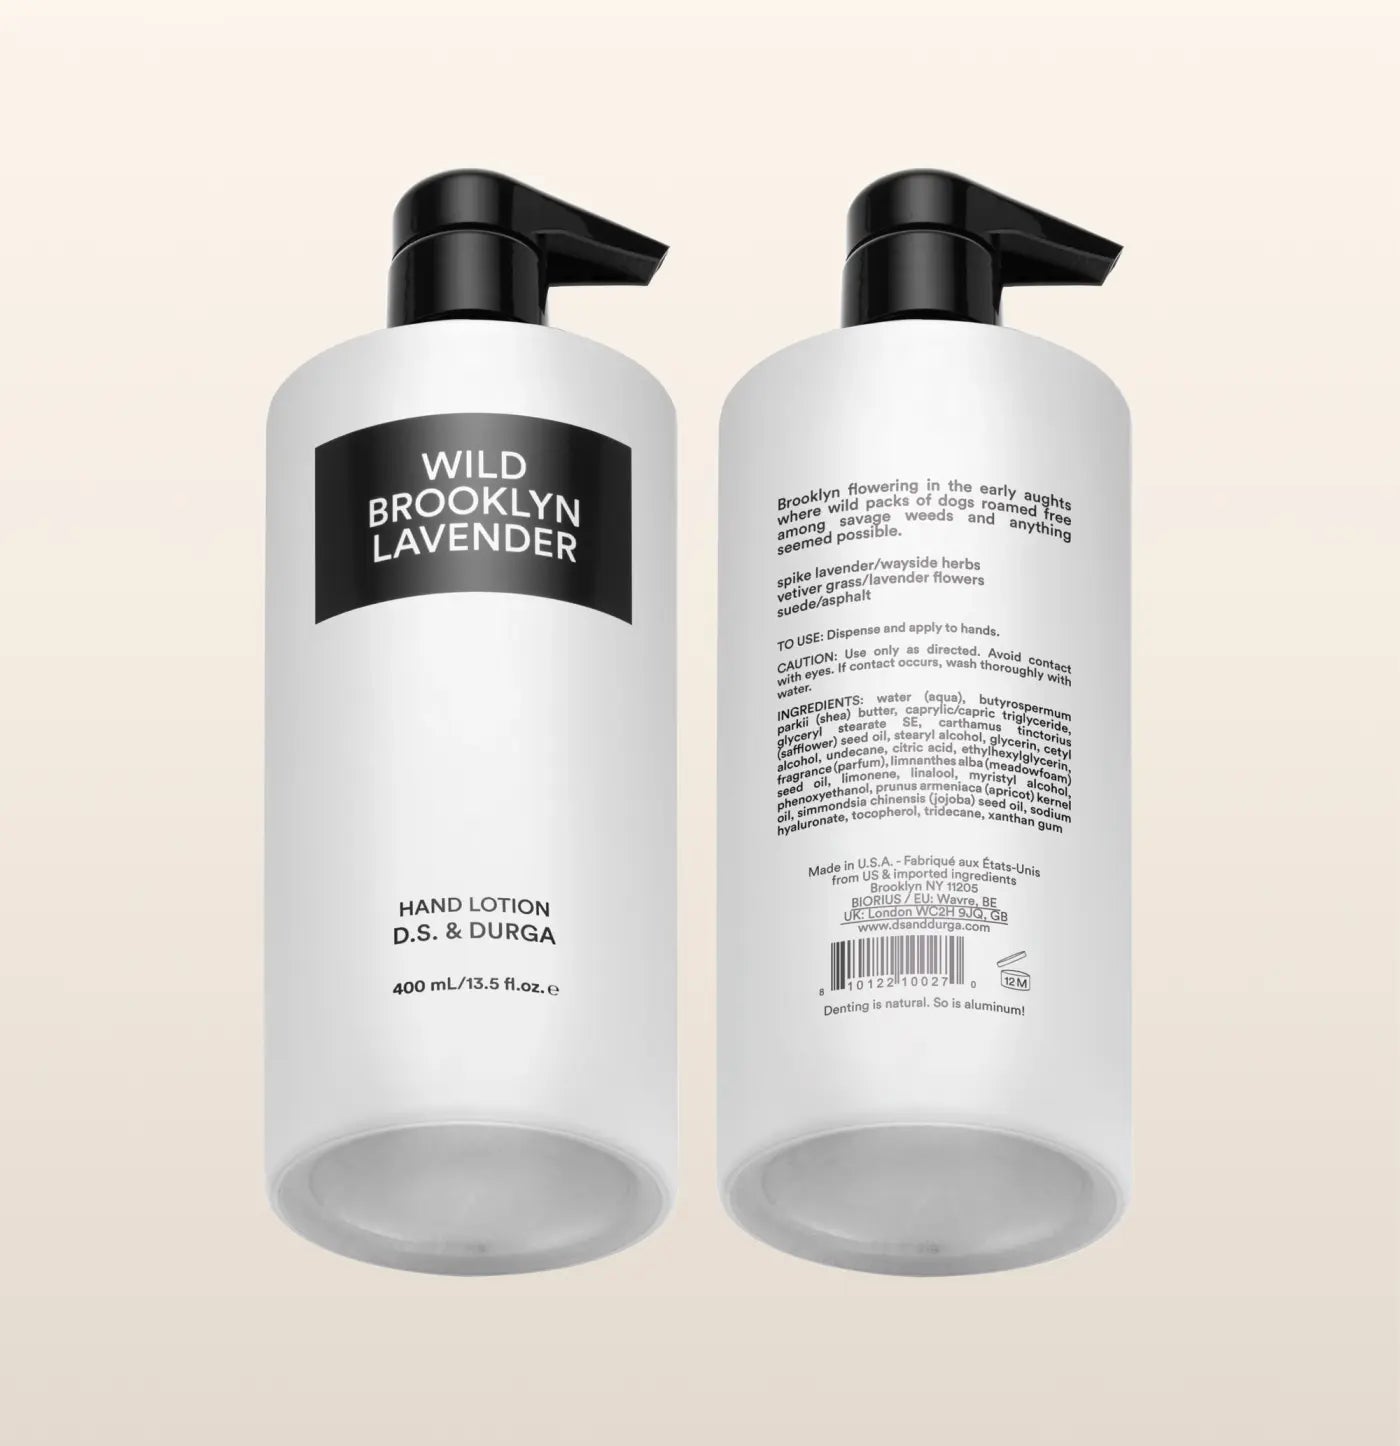 D.S. AND DURGA - WILD BROOKLYN LAVENDER HAND LOTION